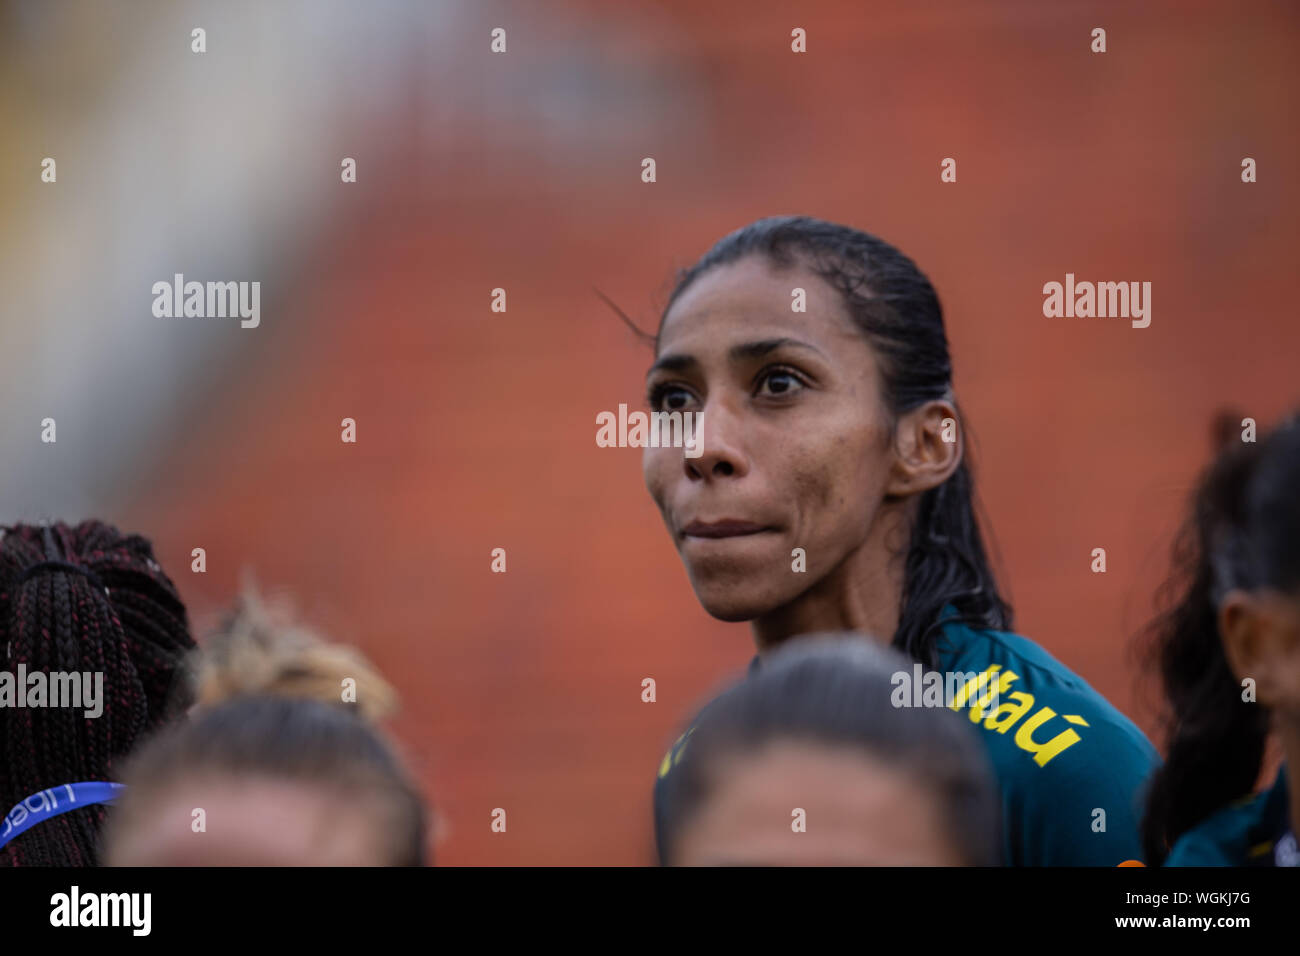 SÃO PAULO, SP - 01.09.2019: BRAZIL X CHILE - Bruna Benites attends the Chilean celebration. Uber Women'scer Cup Cup - Chilean national team wins the Brazilian women&#39occer ten ten penalties after a 0-0 drawdraw in normal time. With a lot of rain, ch disrupted the football ofl of both teams, and with audience of 15,047 paying and income of $ 174,073.00. The match took place this Sunday, September 1st, 2019, at Pacaembu Stadium, in São Paulo. (Photo: Van Campos/Fotoarena) Stock Photo